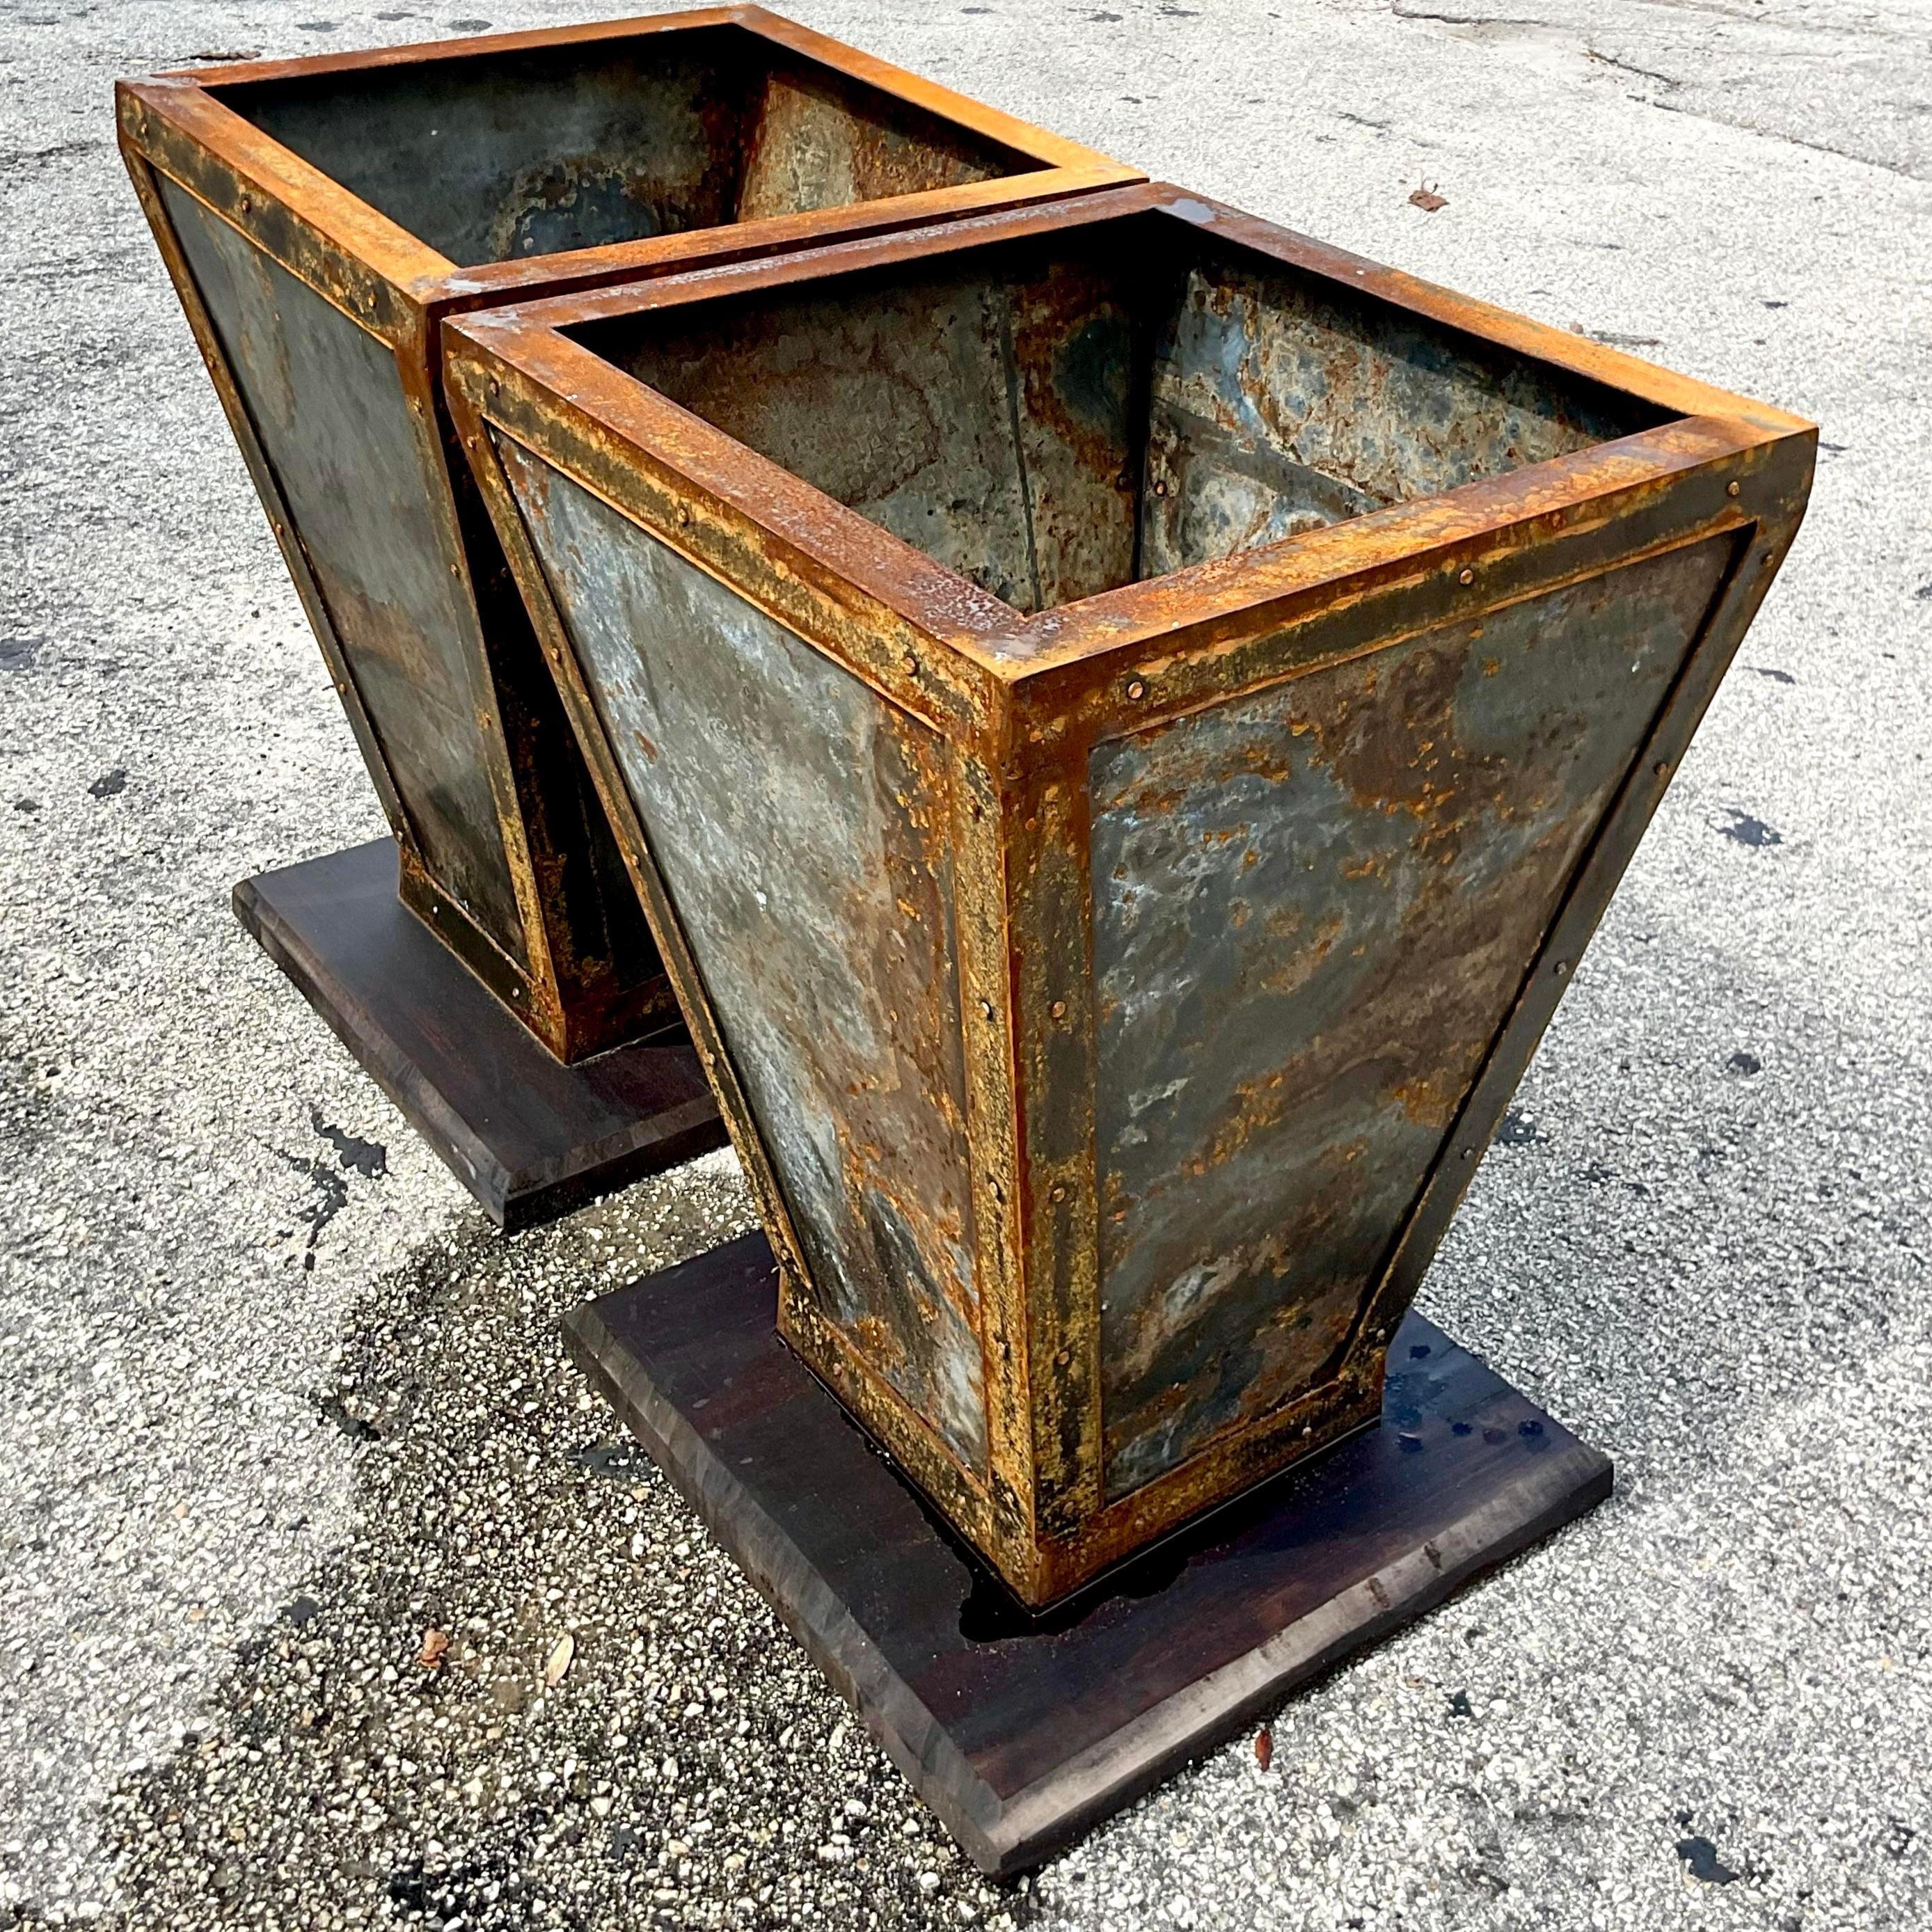 Metal Vintage Boho Patinated Planters on Wooden Plinths - a Pair